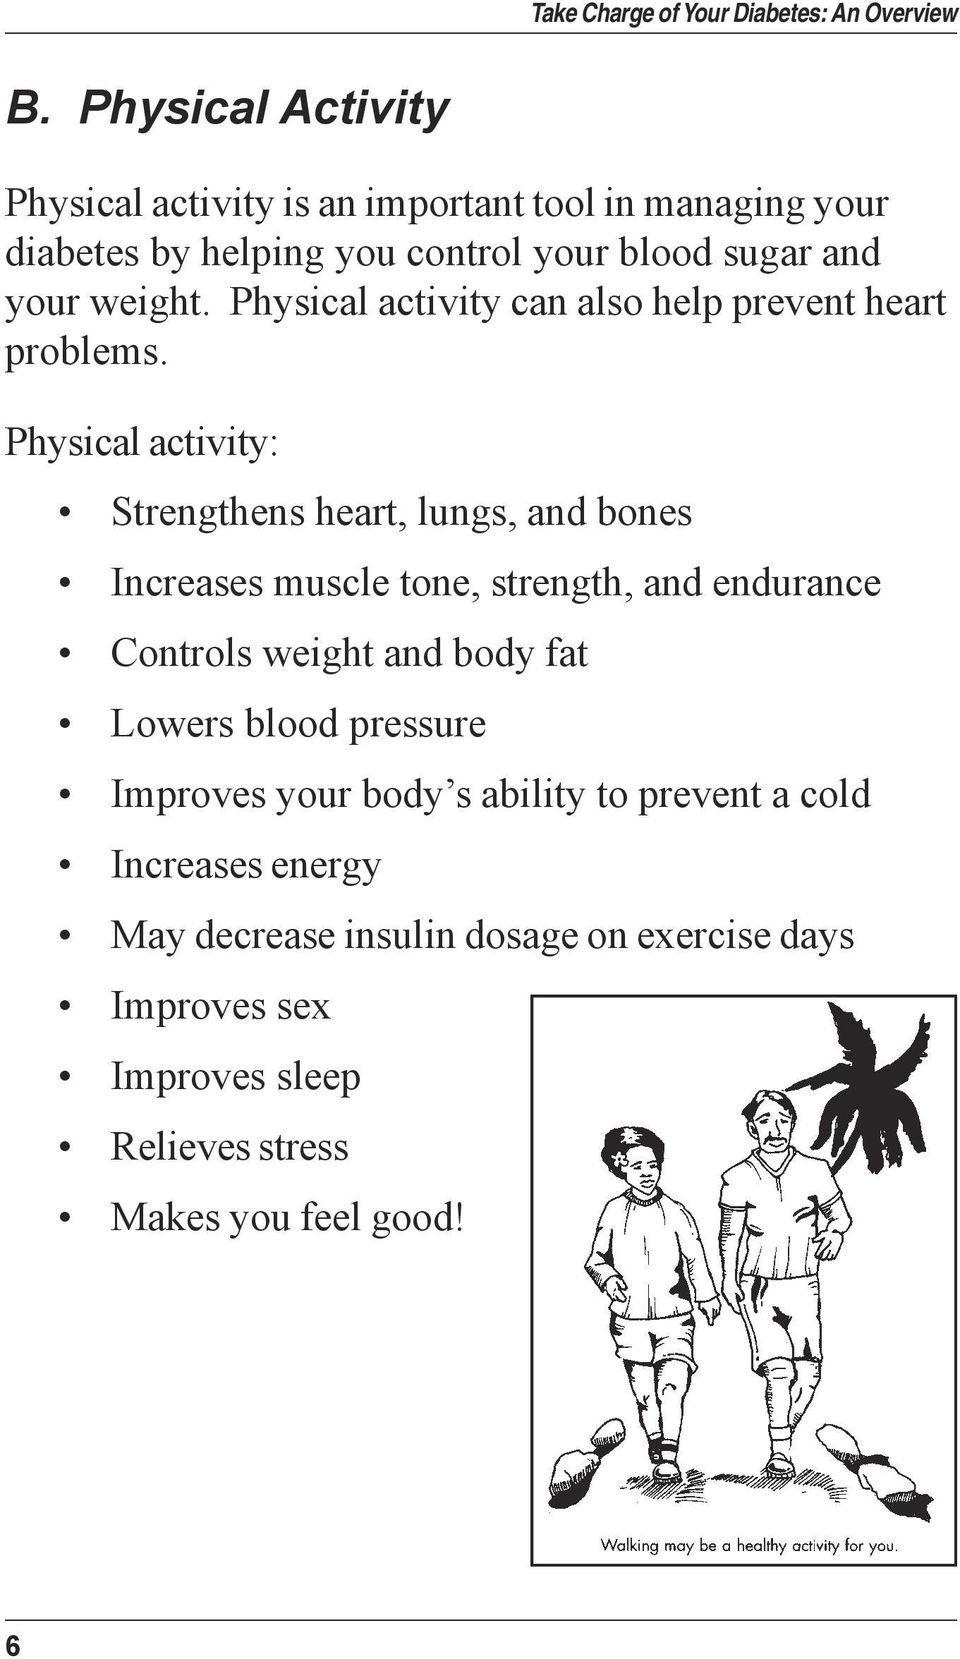 Physical activity: Strengthens heart, lungs, and bones Increases muscle tone, strength, and endurance Controls weight and body fat